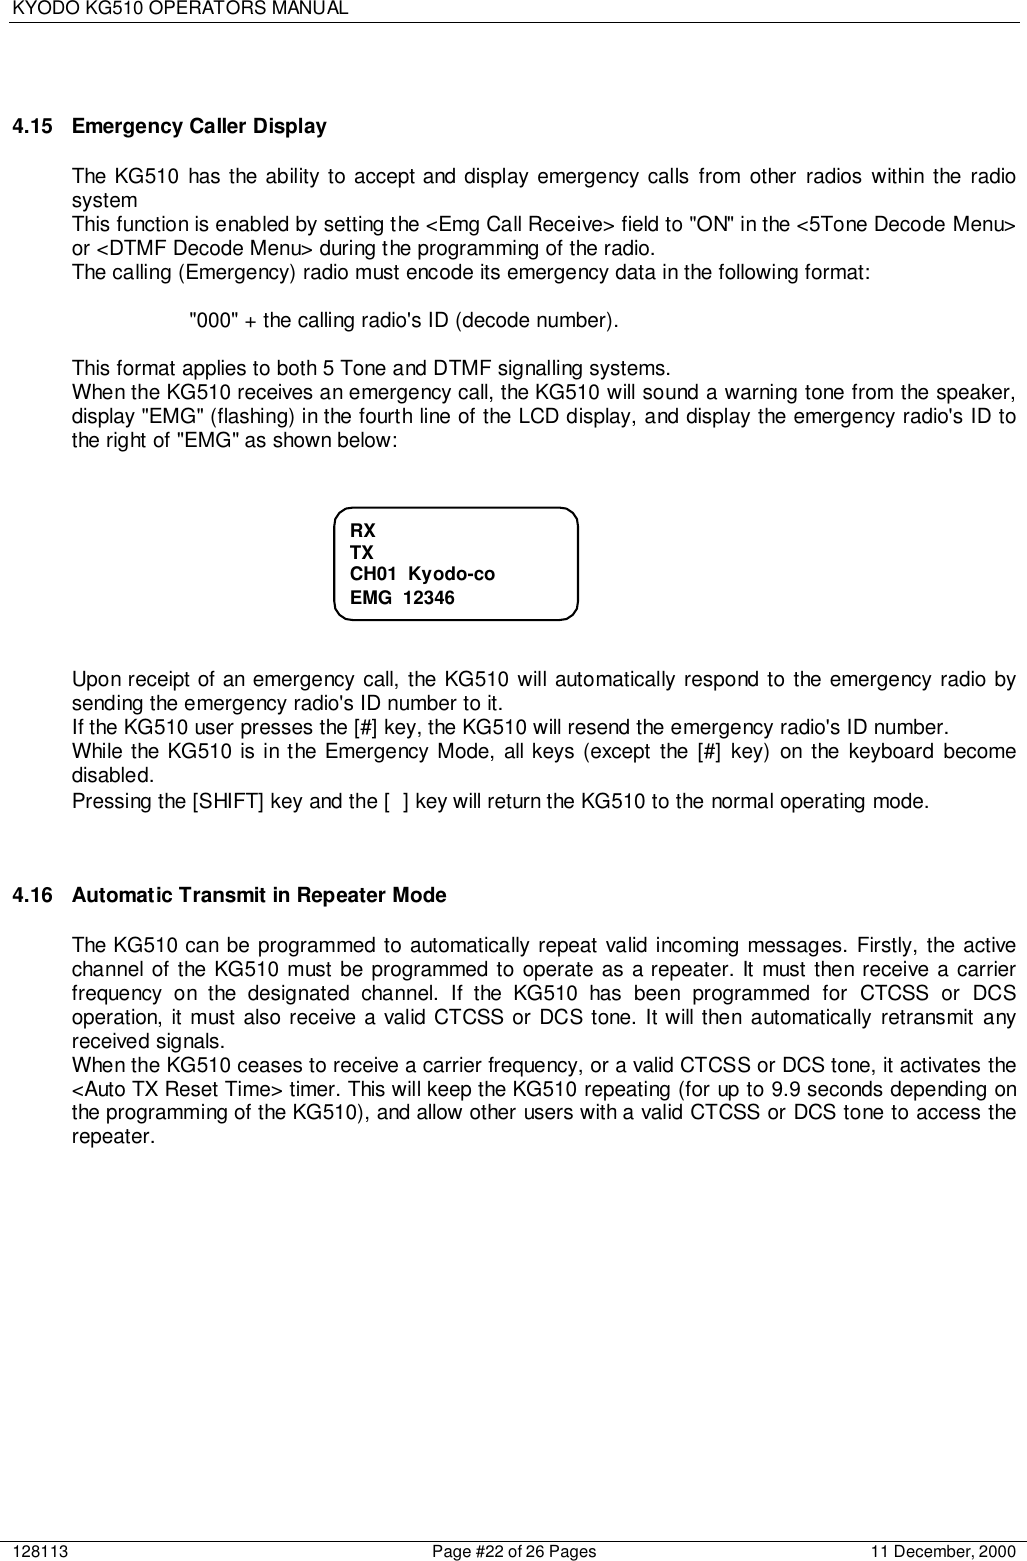 KYODO KG510 OPERATORS MANUAL128113 Page #22 of 26 Pages 11 December, 20004.15  Emergency Caller DisplayThe KG510 has the ability to accept and display emergency calls from other radios within the radiosystemThis function is enabled by setting the &lt;Emg Call Receive&gt; field to &quot;ON&quot; in the &lt;5Tone Decode Menu&gt;or &lt;DTMF Decode Menu&gt; during the programming of the radio.The calling (Emergency) radio must encode its emergency data in the following format:&quot;000&quot; + the calling radio&apos;s ID (decode number).This format applies to both 5 Tone and DTMF signalling systems.When the KG510 receives an emergency call, the KG510 will sound a warning tone from the speaker,display &quot;EMG&quot; (flashing) in the fourth line of the LCD display, and display the emergency radio&apos;s ID tothe right of &quot;EMG&quot; as shown below:Upon receipt of an emergency call, the KG510 will automatically respond to the emergency radio bysending the emergency radio&apos;s ID number to it.If the KG510 user presses the [#] key, the KG510 will resend the emergency radio&apos;s ID number.While the KG510 is in the Emergency Mode, all keys (except the [#] key) on the keyboard becomedisabled.Pressing the [SHIFT] key and the [ ] key will return the KG510 to the normal operating mode.4.16  Automatic Transmit in Repeater ModeThe KG510 can be programmed to automatically repeat valid incoming messages. Firstly, the activechannel of the KG510 must be programmed to operate as a repeater. It must then receive a carrierfrequency on the designated channel. If the KG510 has been programmed for CTCSS or DCSoperation, it must also receive a valid CTCSS or DCS tone. It will then automatically retransmit anyreceived signals.When the KG510 ceases to receive a carrier frequency, or a valid CTCSS or DCS tone, it activates the&lt;Auto TX Reset Time&gt; timer. This will keep the KG510 repeating (for up to 9.9 seconds depending onthe programming of the KG510), and allow other users with a valid CTCSS or DCS tone to access therepeater.RXTXCH01  Kyodo-coEMG  12346